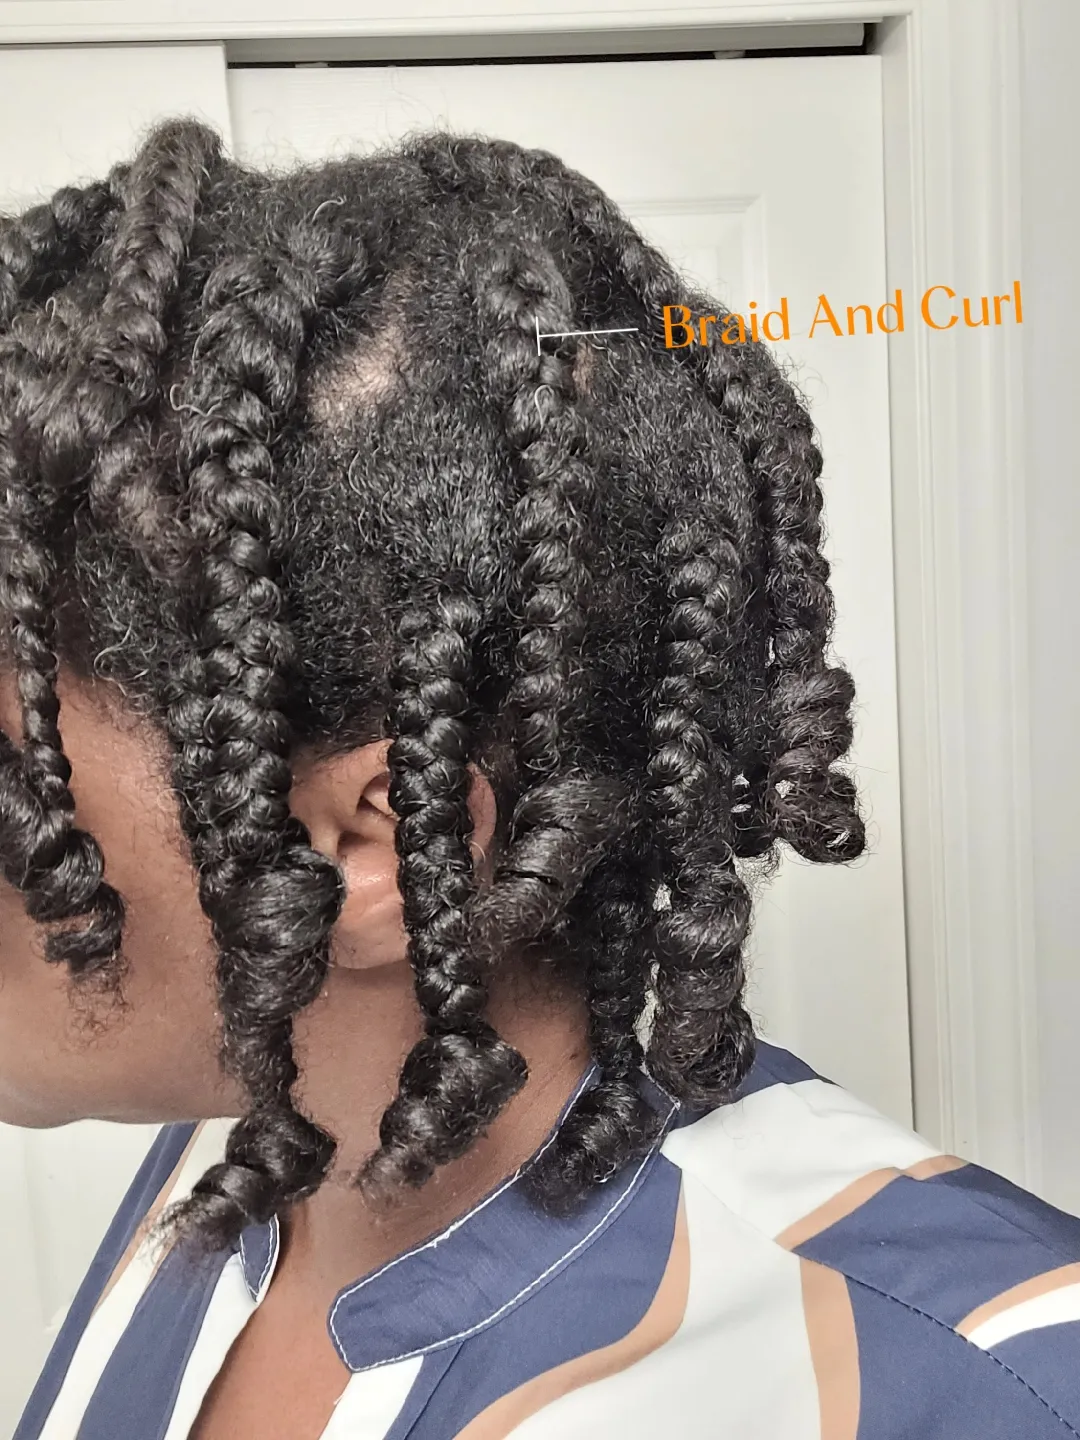 I got these knotless braids 2 weeks ago and my natural hair is poking out  of the braids. Has this happened to any of you? : r/Naturalhair